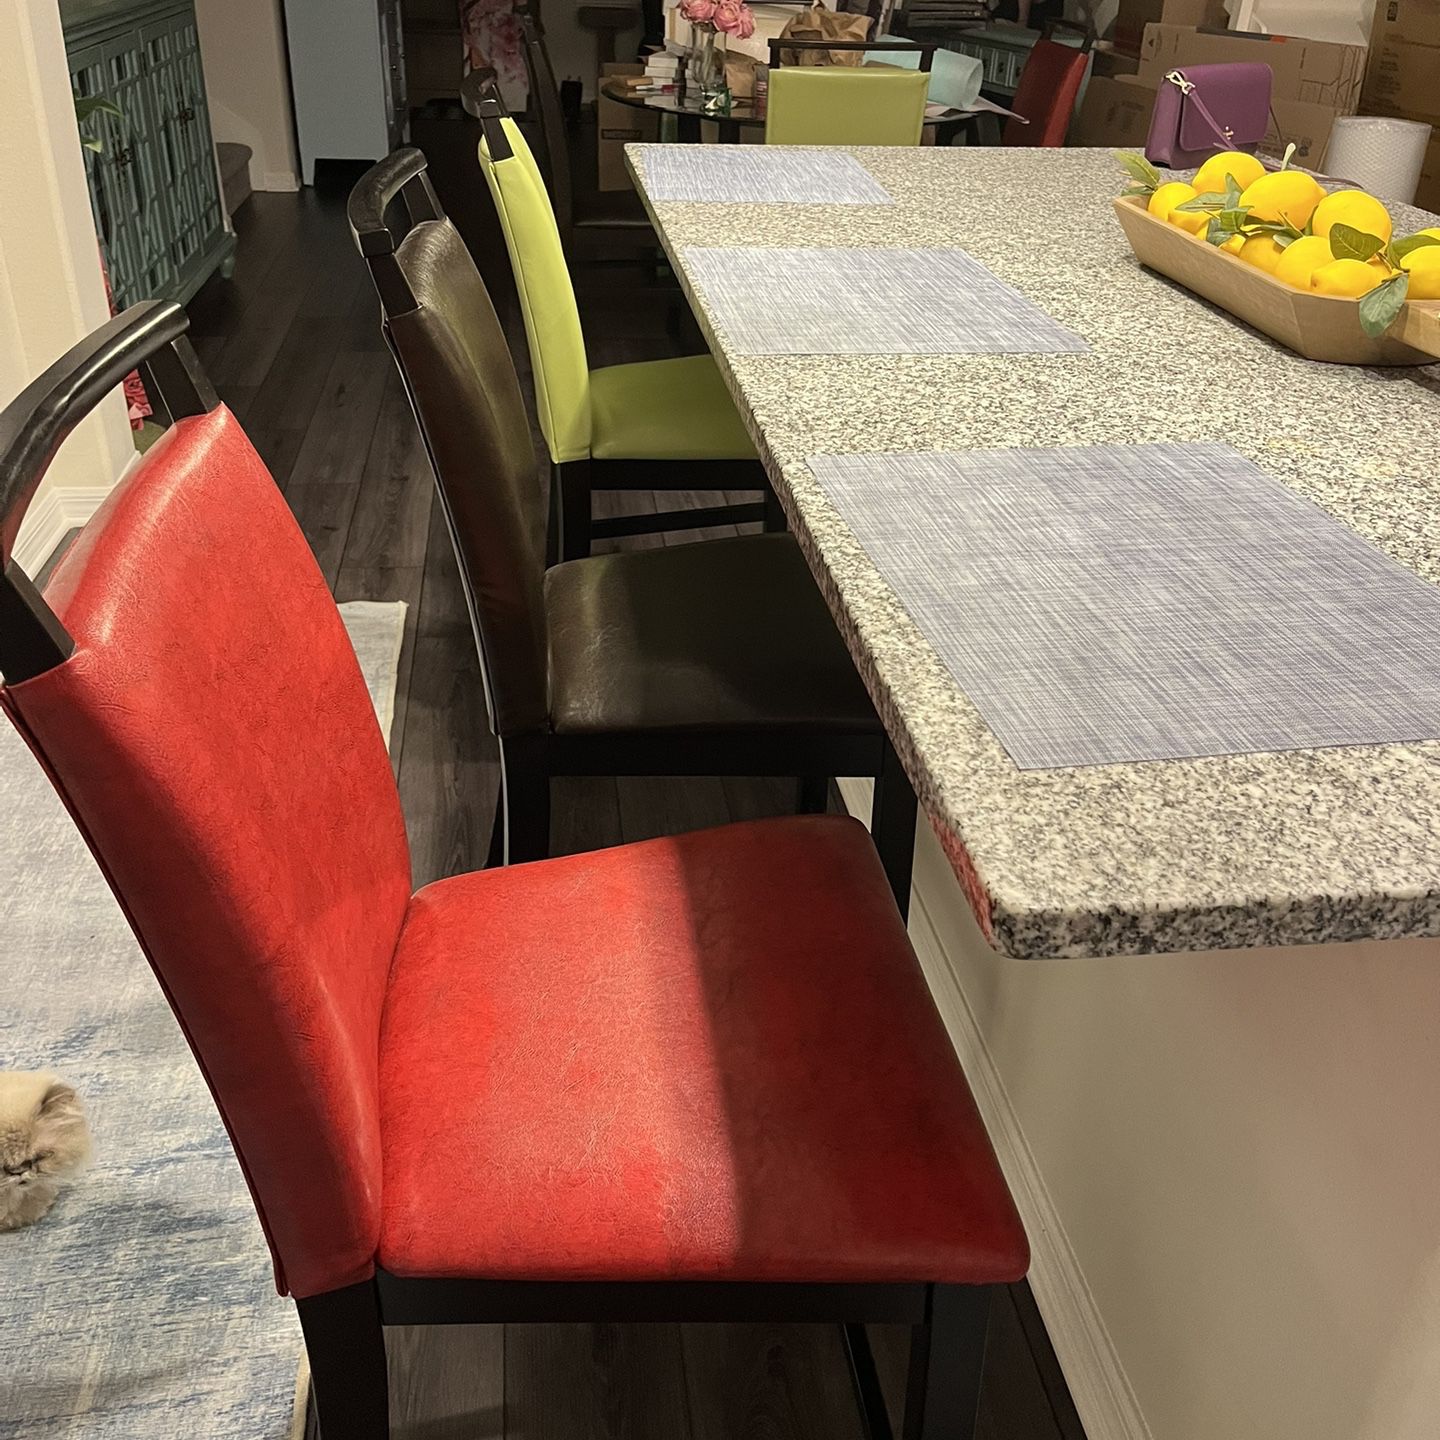 3 Counter Height Stools